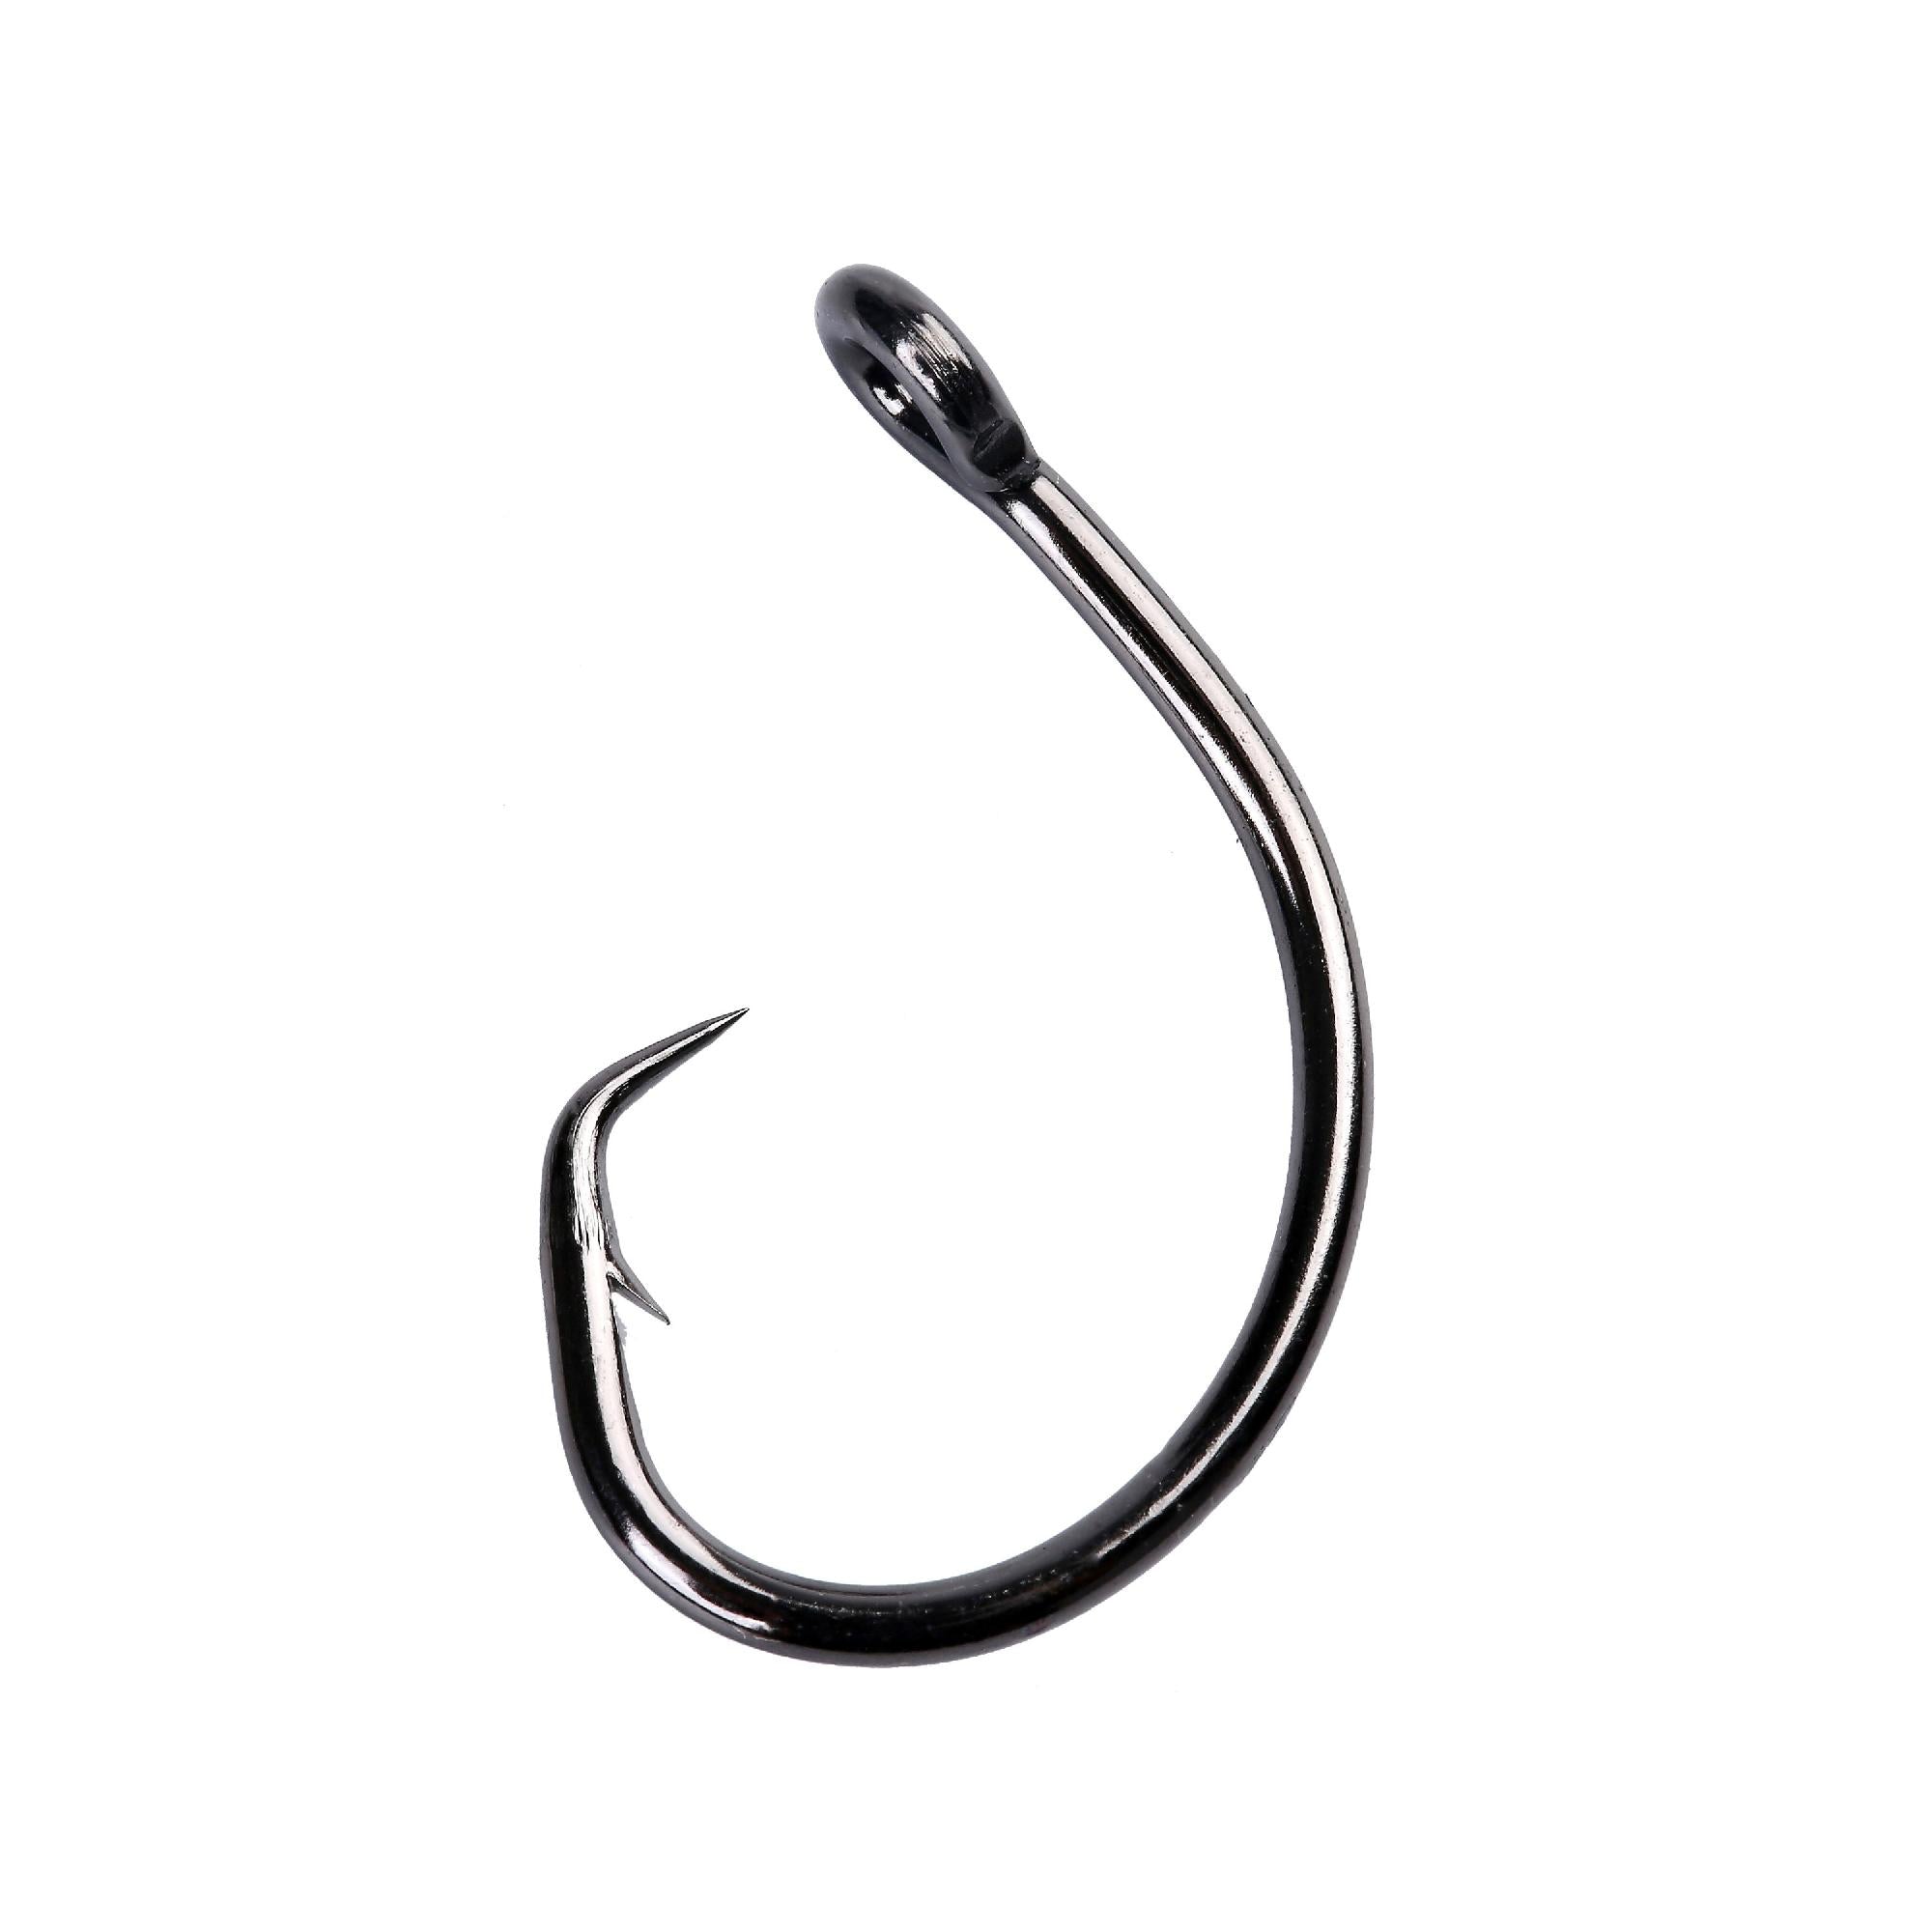 Mustad 39931NP-BN 2X Strong Inline Demon Circle Hooks Size 3/0 Jagged Tooth  Tackle